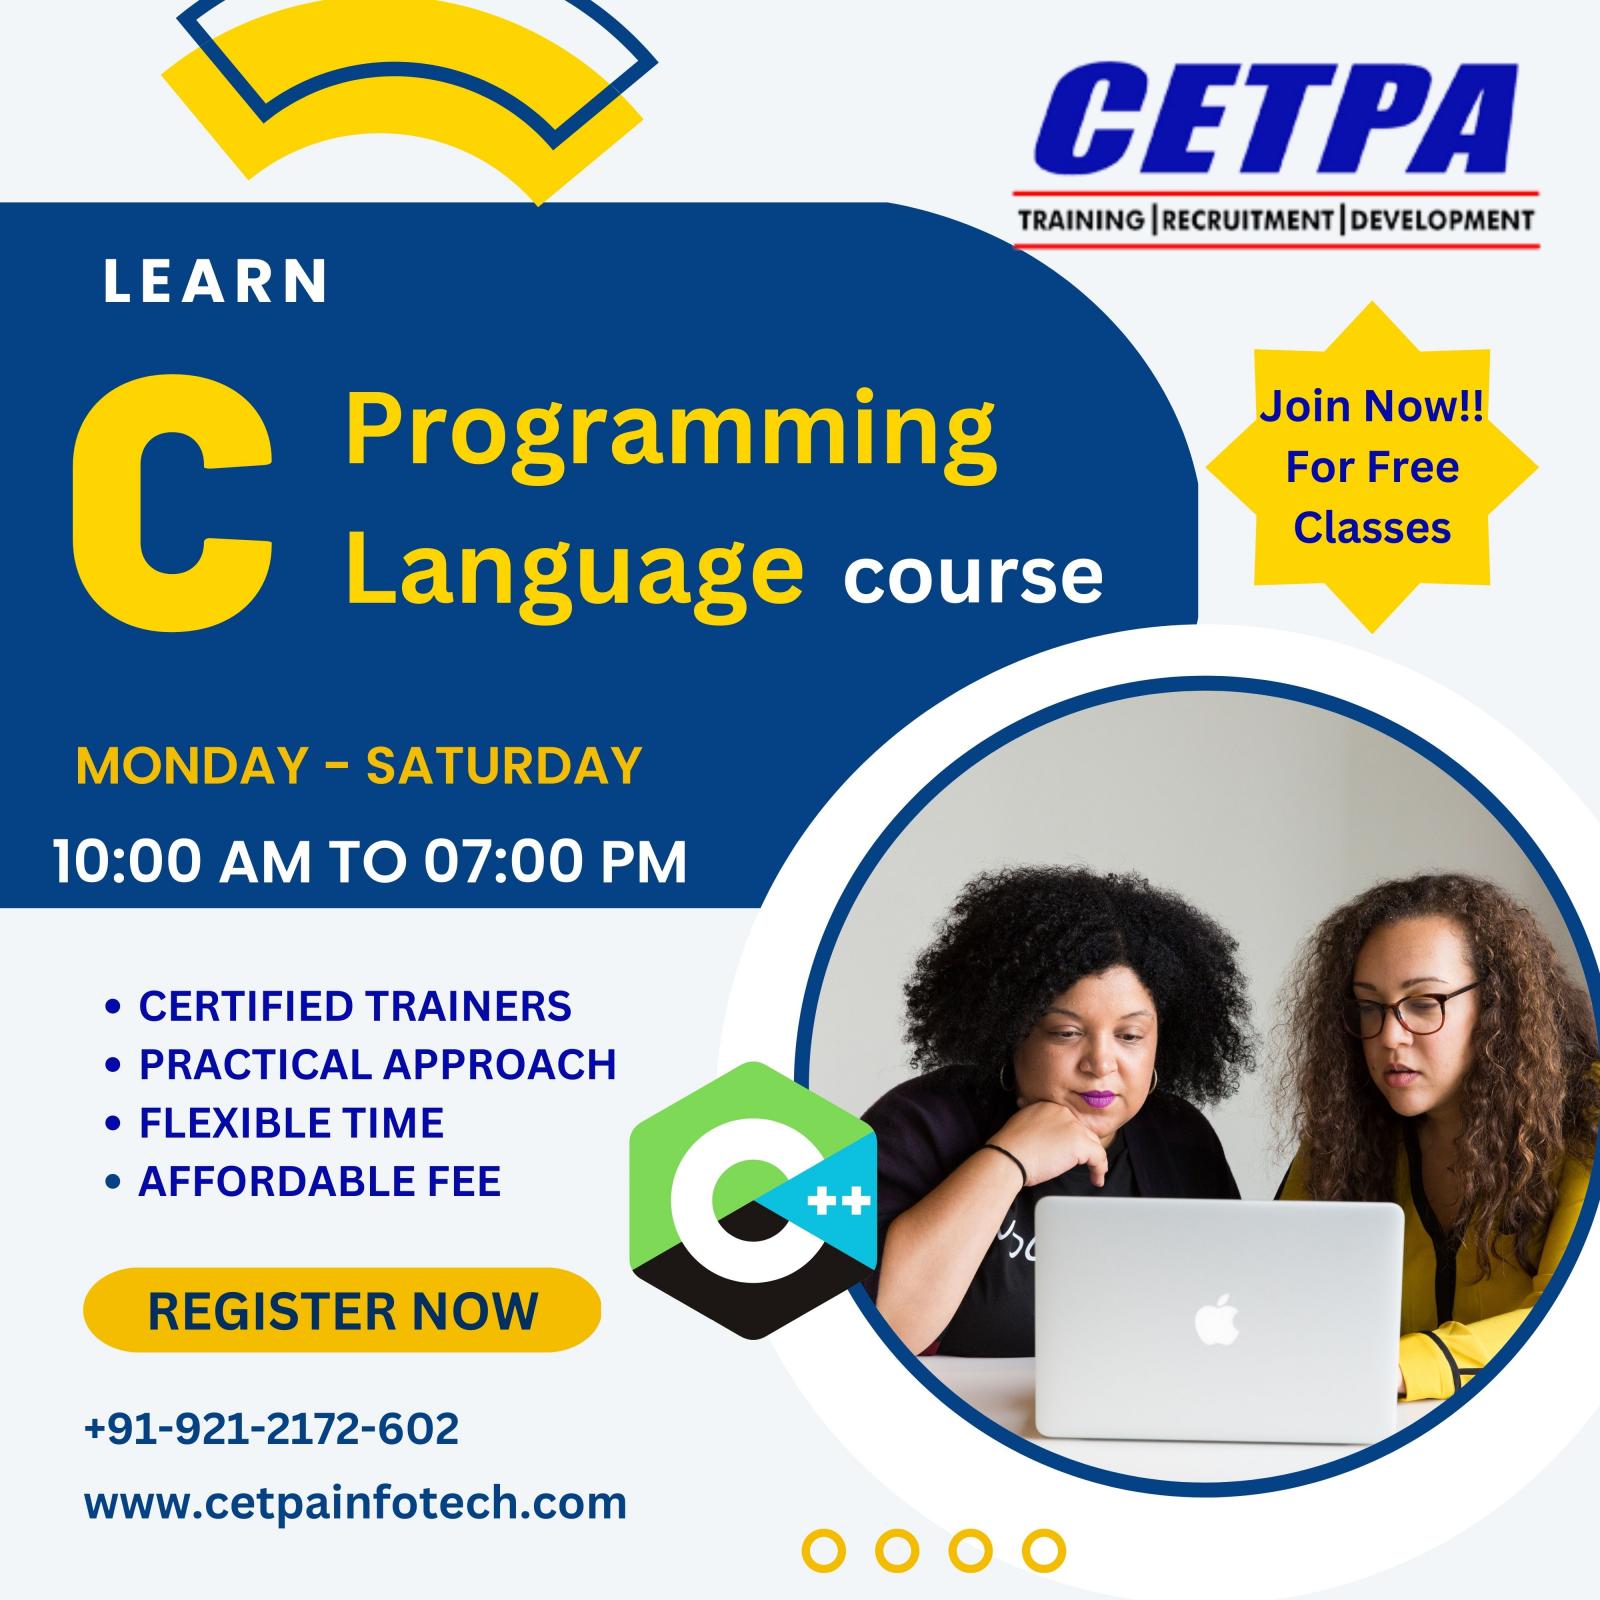 Attend the Best C Language Training in Noida At CETPA Infotech!